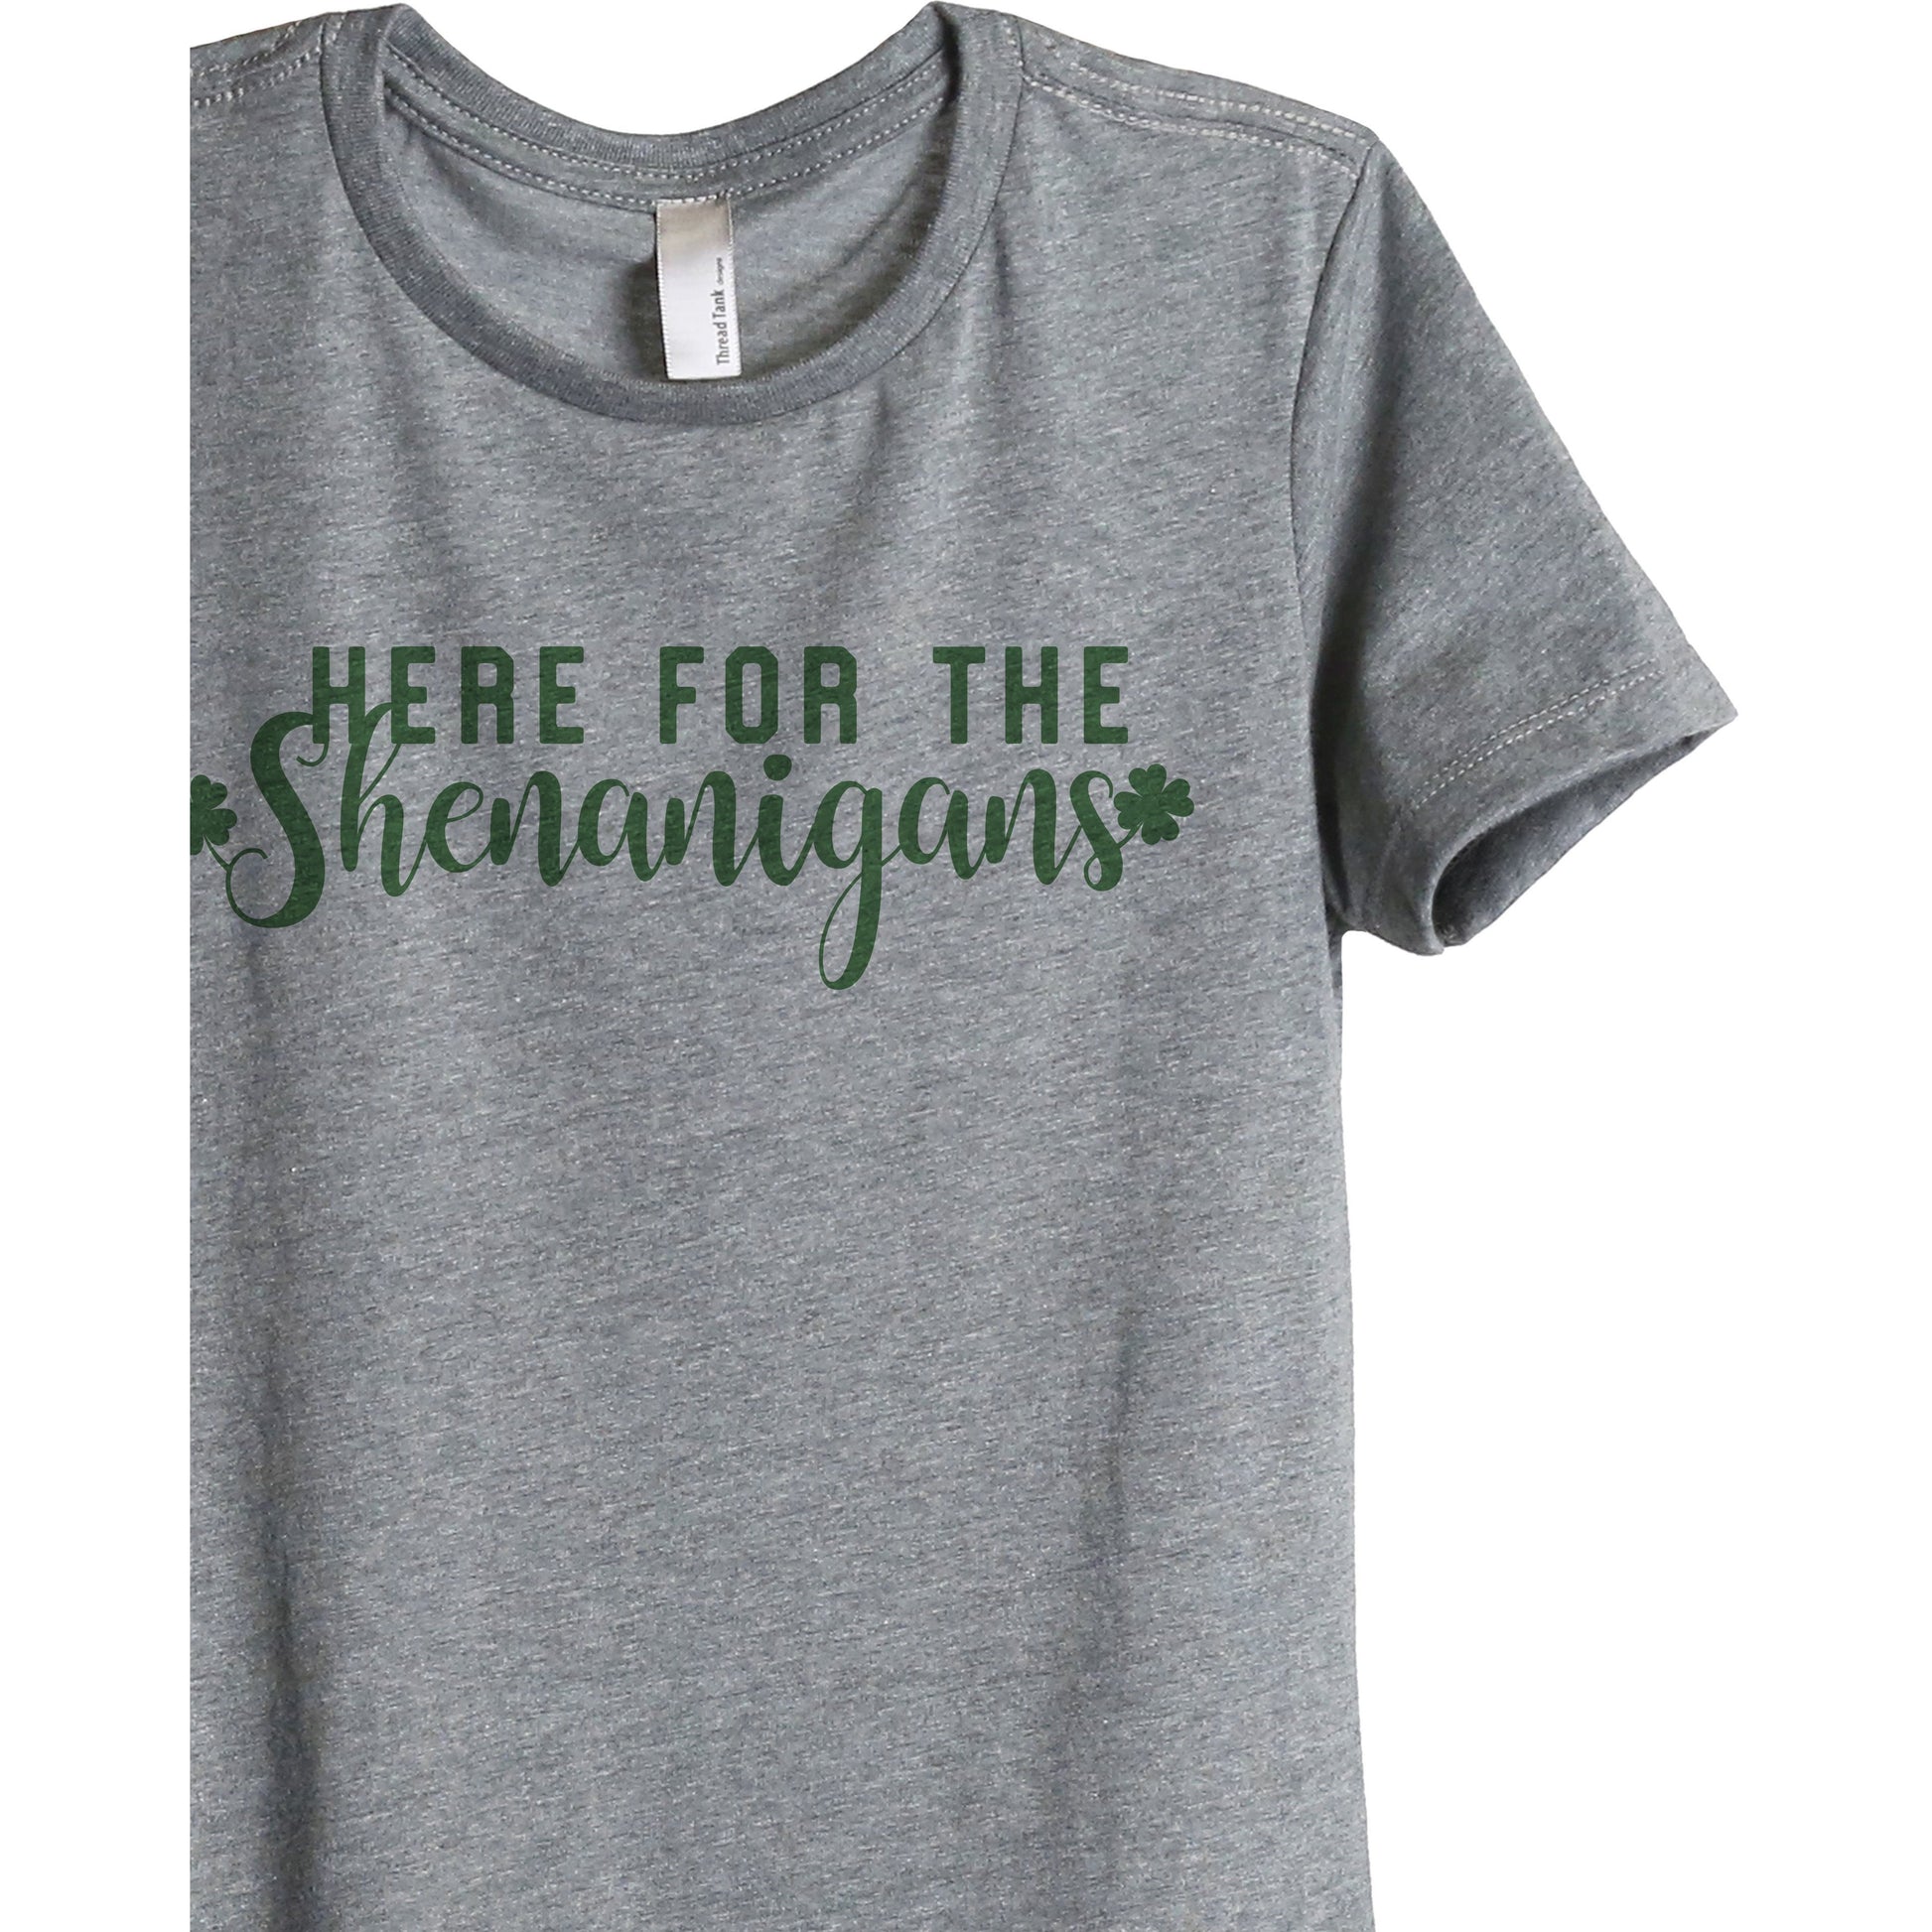 Here For The Shenanigans Women's Relaxed Crewneck T-Shirt Top Tee Heather Grey Exclusive Green Zoom Details
